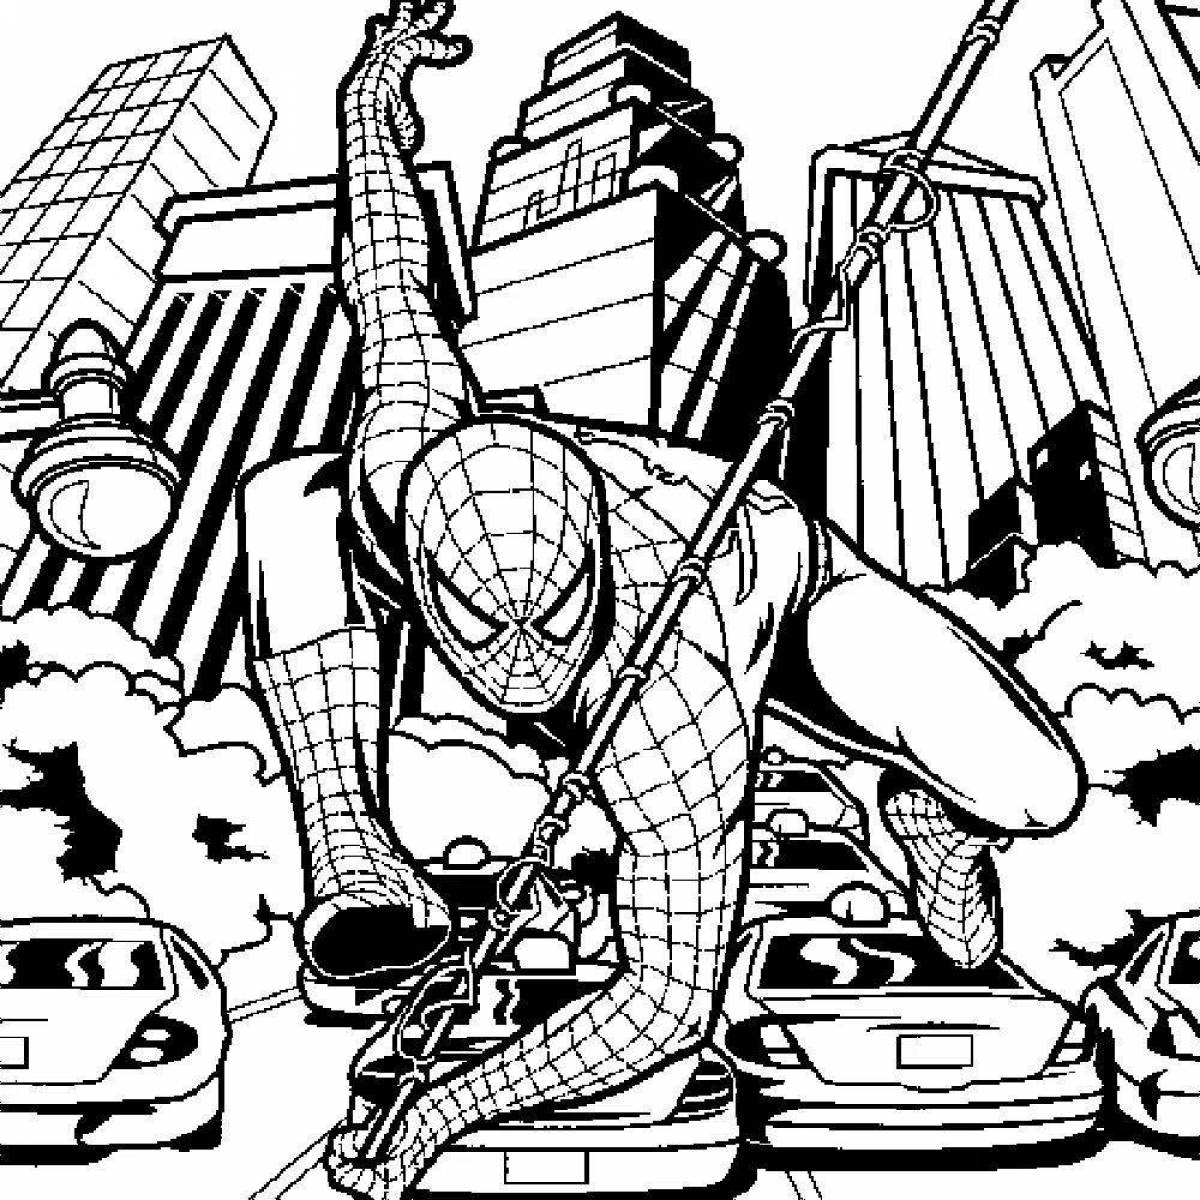 Spiderman's adorable anti-stress coloring book